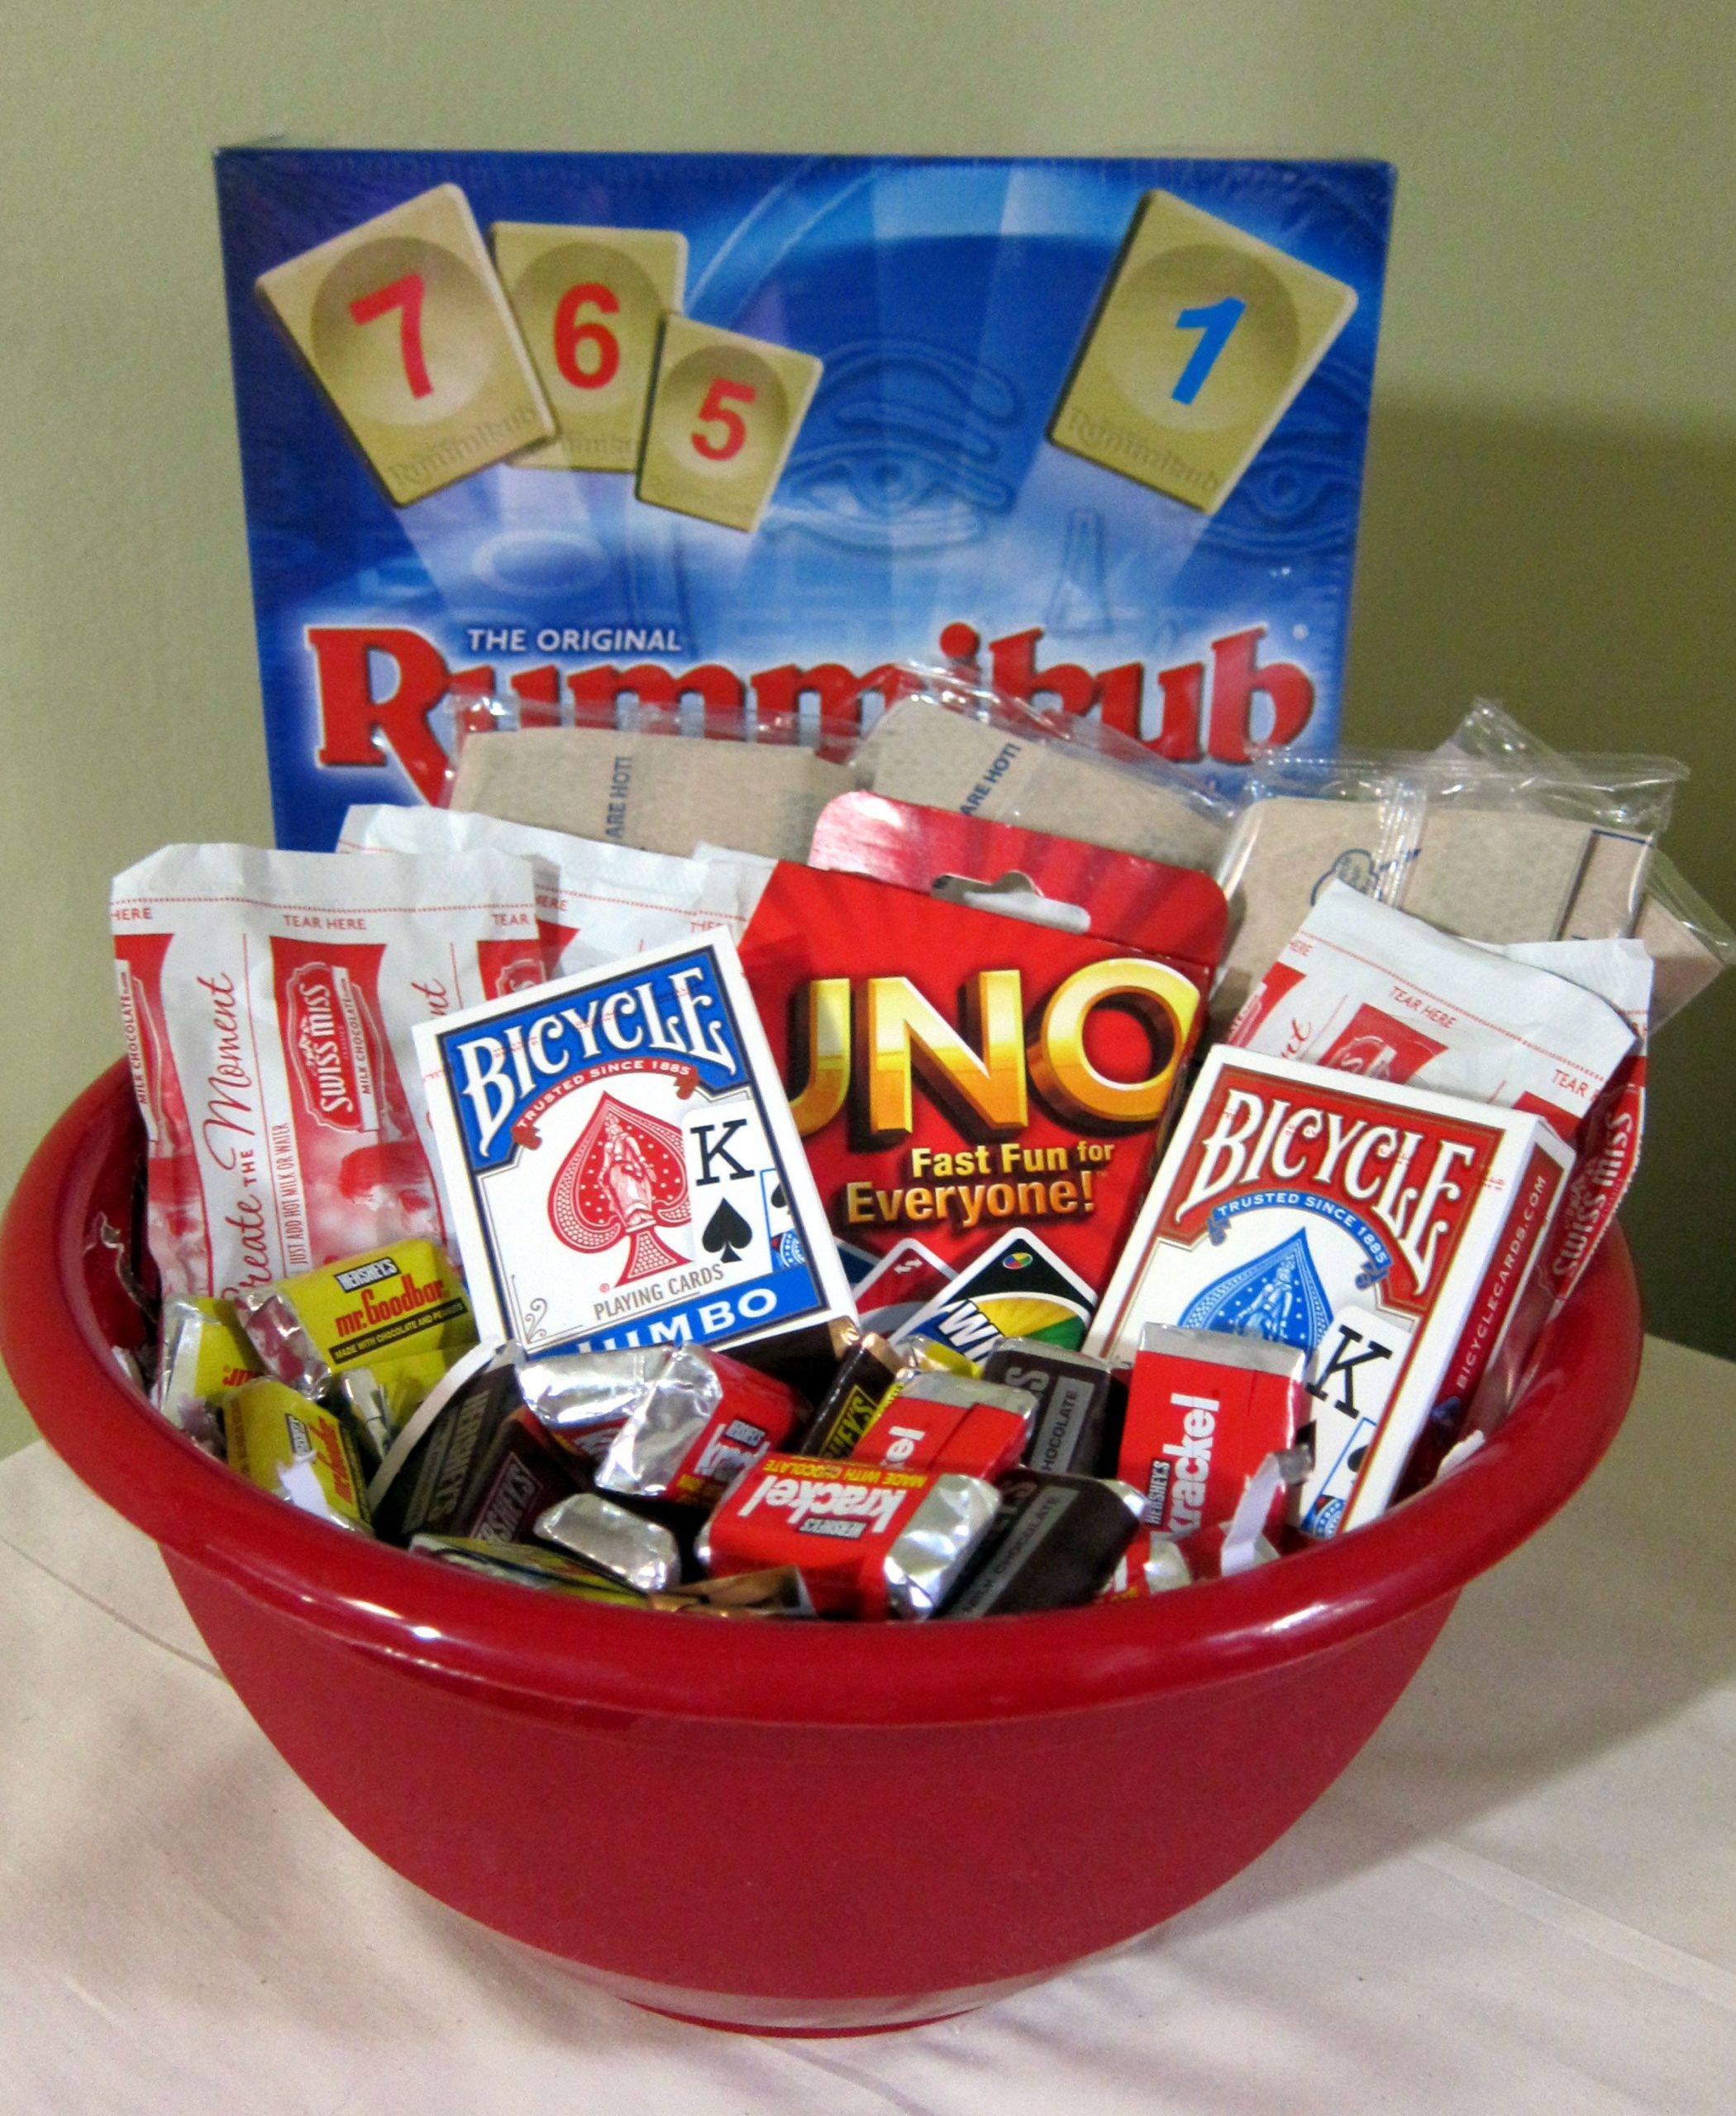 Family Night Gift Basket Ideas
 Pin by Craft Classes line = line Workshops on Gift